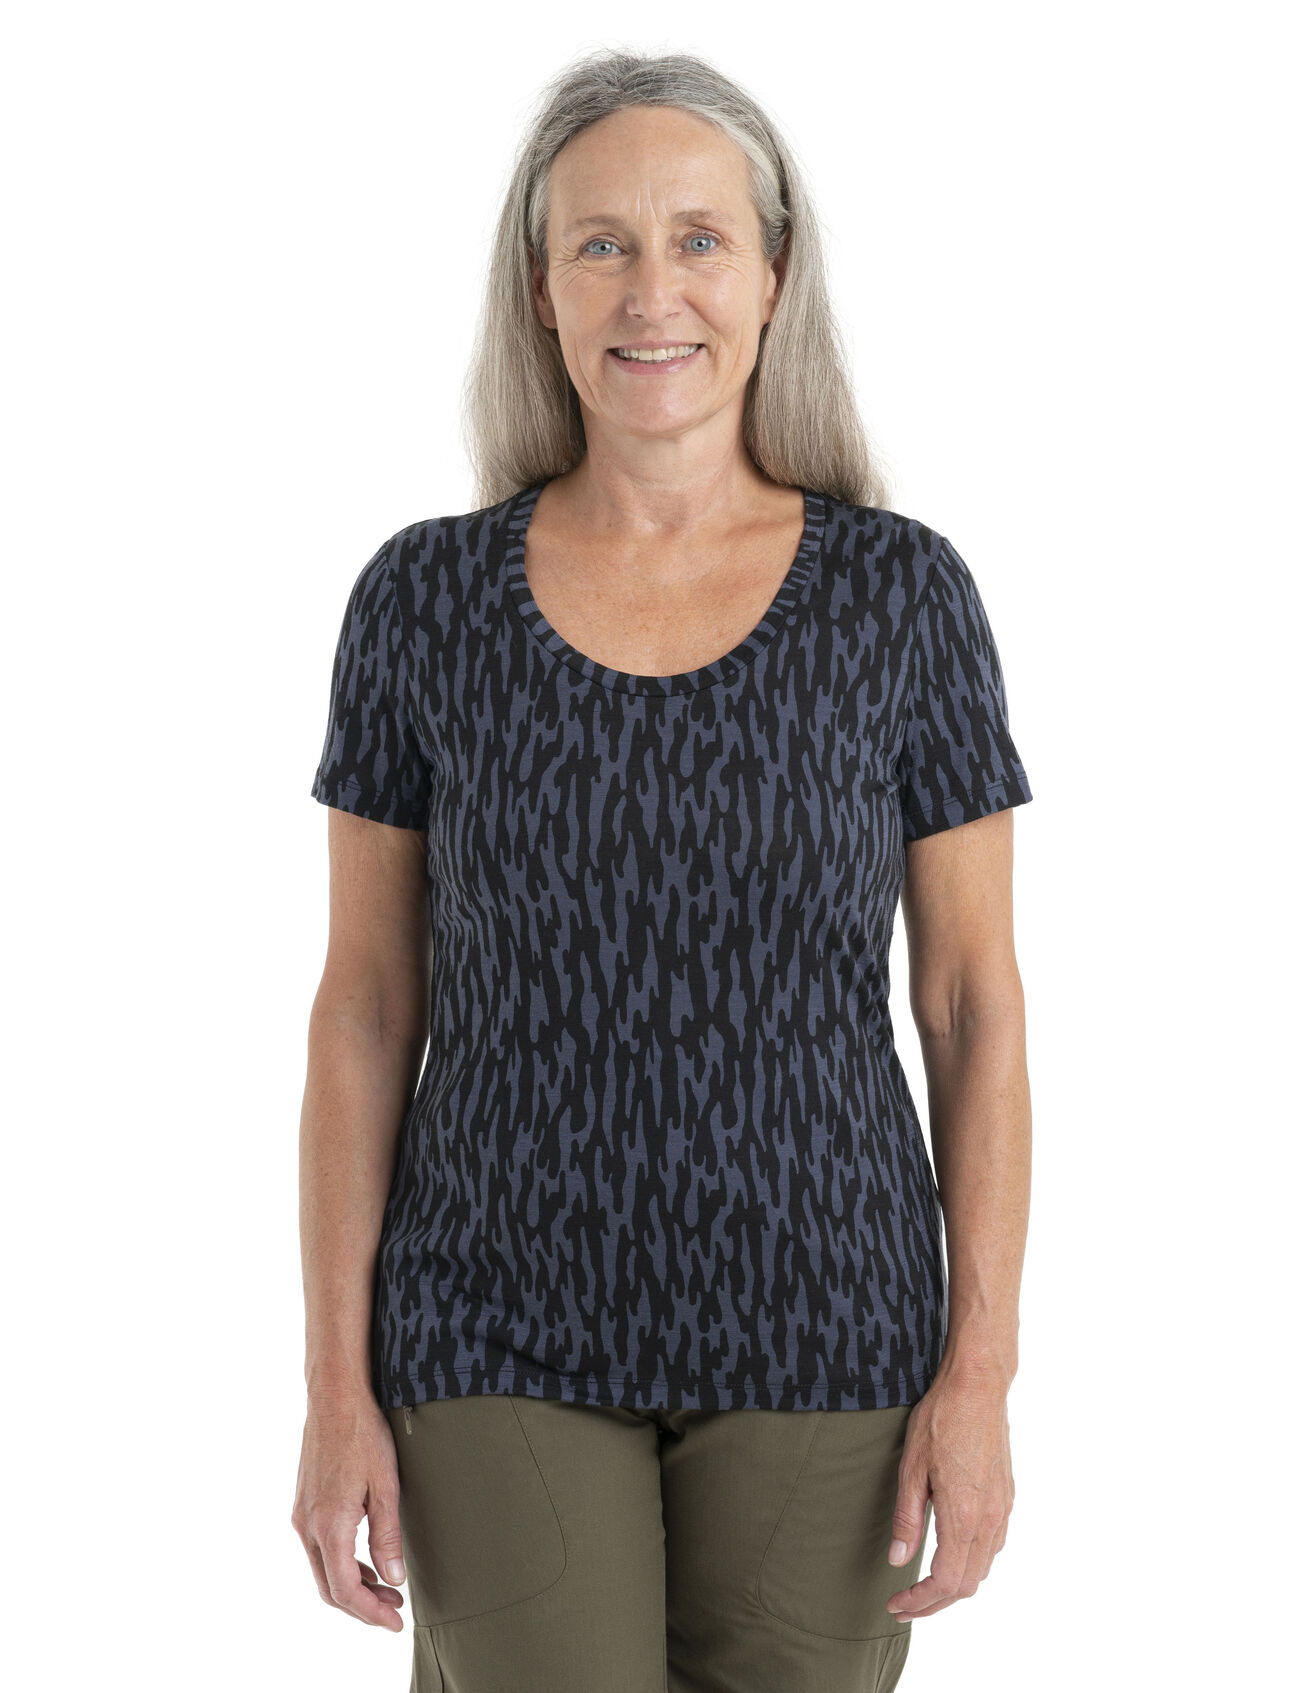 Womens Merino 150 Tech Lite II Short Sleeve Scoop T-Shirt Glacial Flow Our versatile tech tee that provides comfort, breathability and odour-resistance for any adventure you can think of, the 150 Tech Lite II Short Sleeve Scoop Tee Glacial Flow features 100% merino for all-natural performance. The tee's unique camo print references the fluid pattern found in the reflection of a glacial lake.